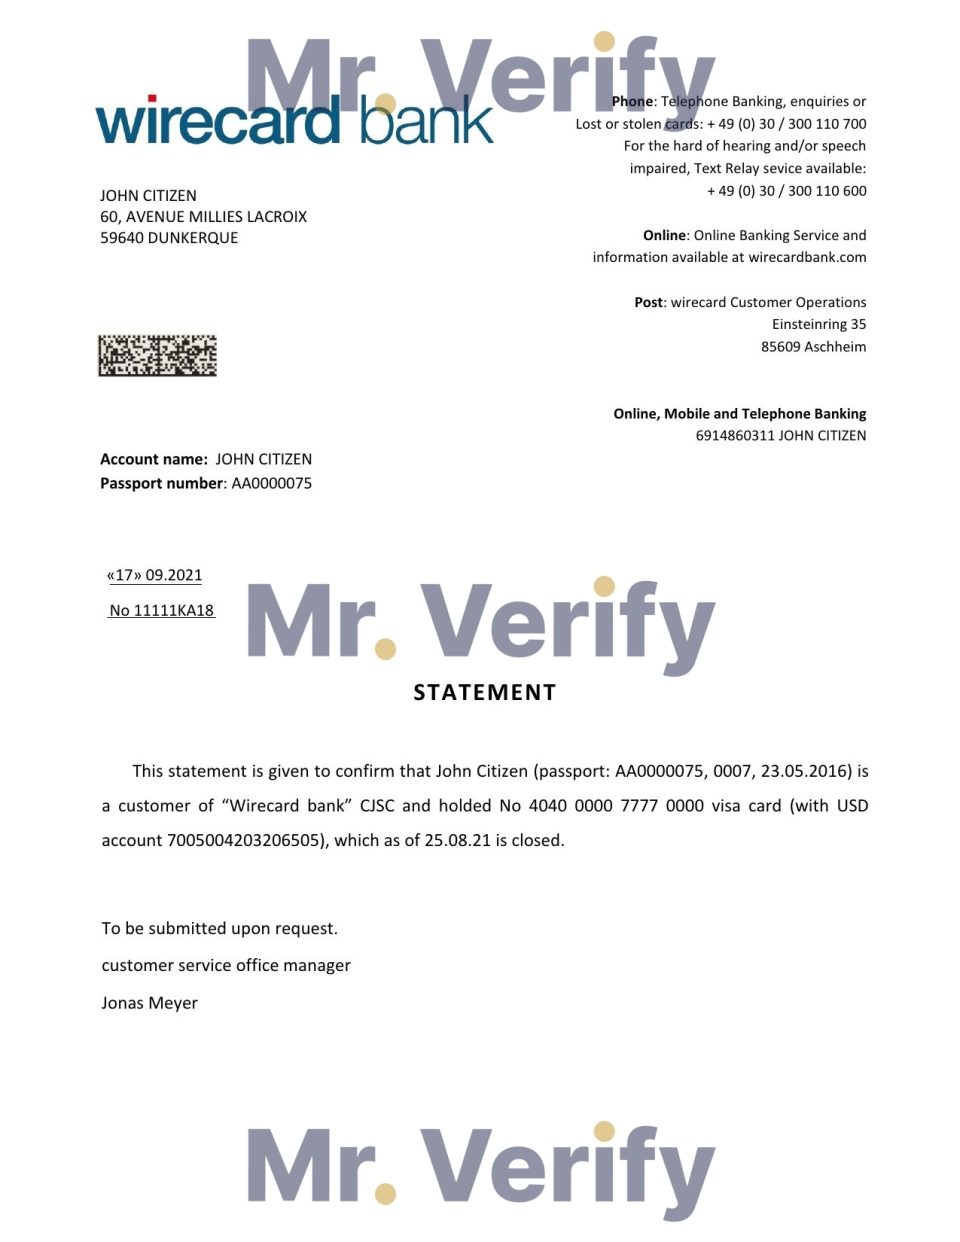 Download Germany Wirecard Bank Reference Letter Templates | Editable Word